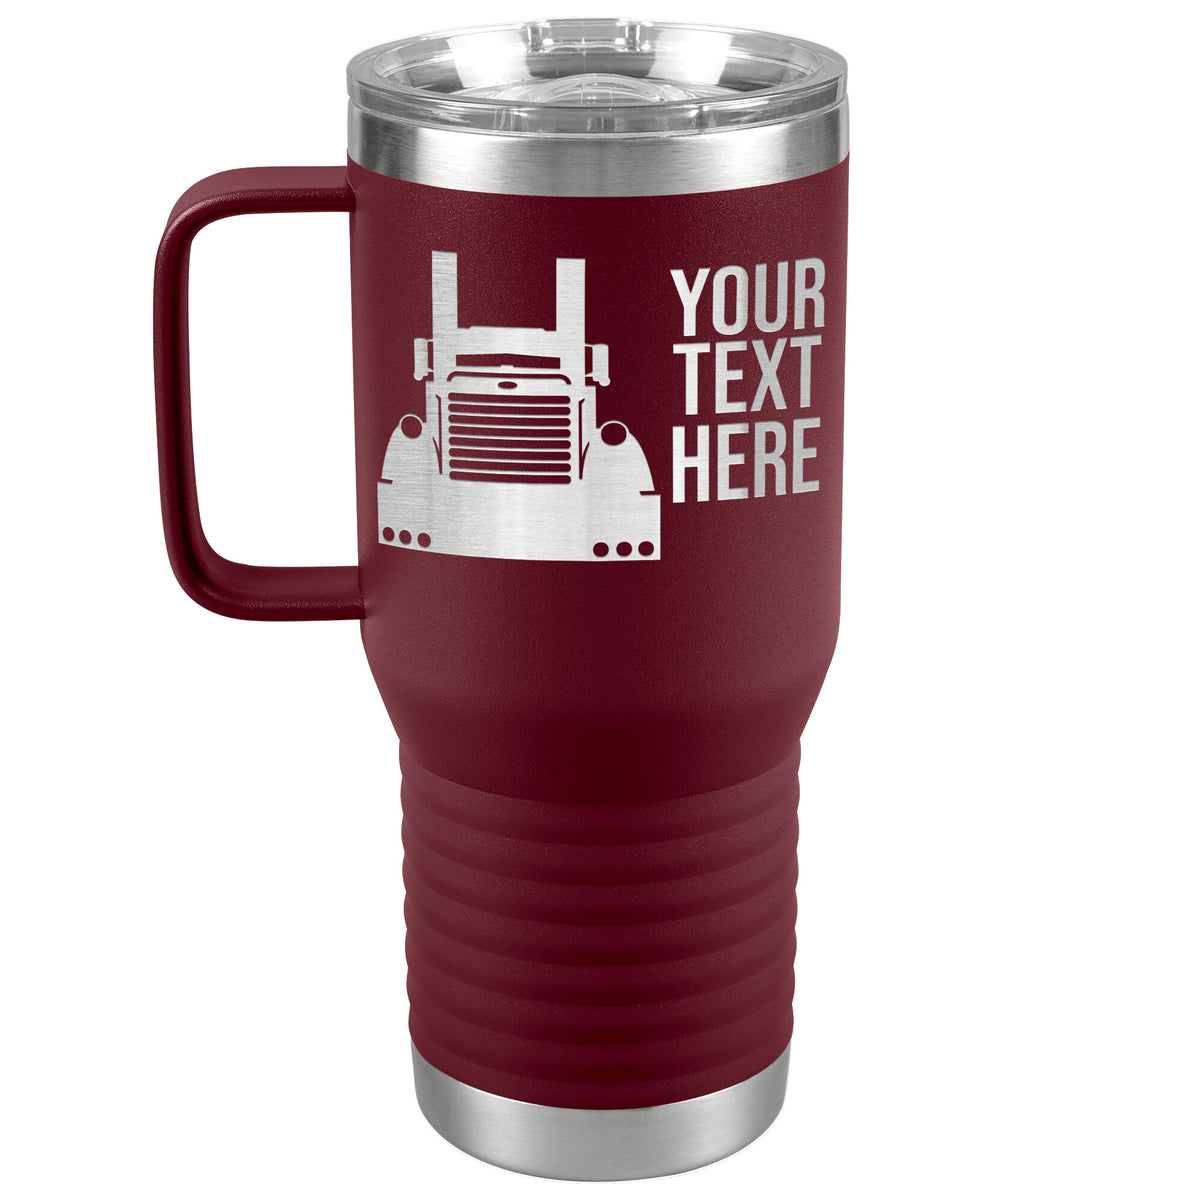 Pete Your Text Here 20oz Handle Tumbler Free Shipping